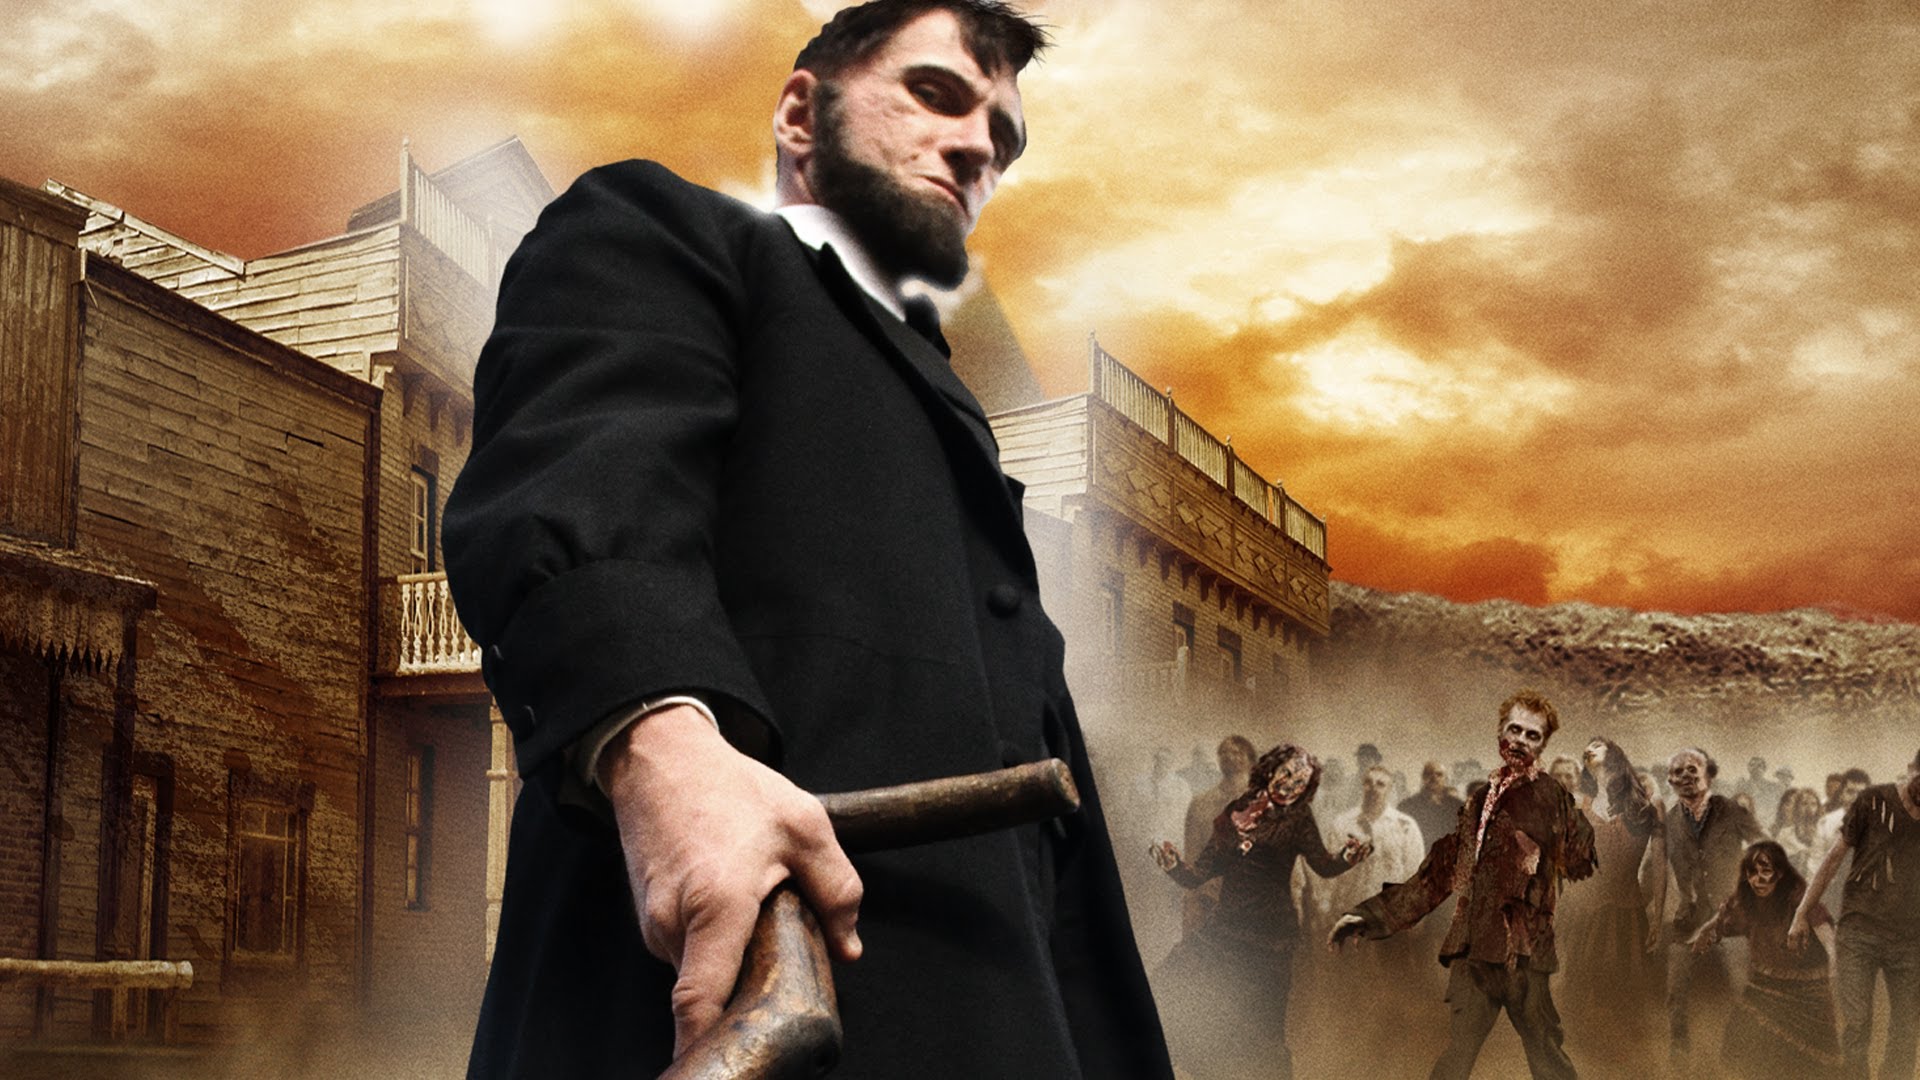 Watch Abraham Lincoln vs. Zombies